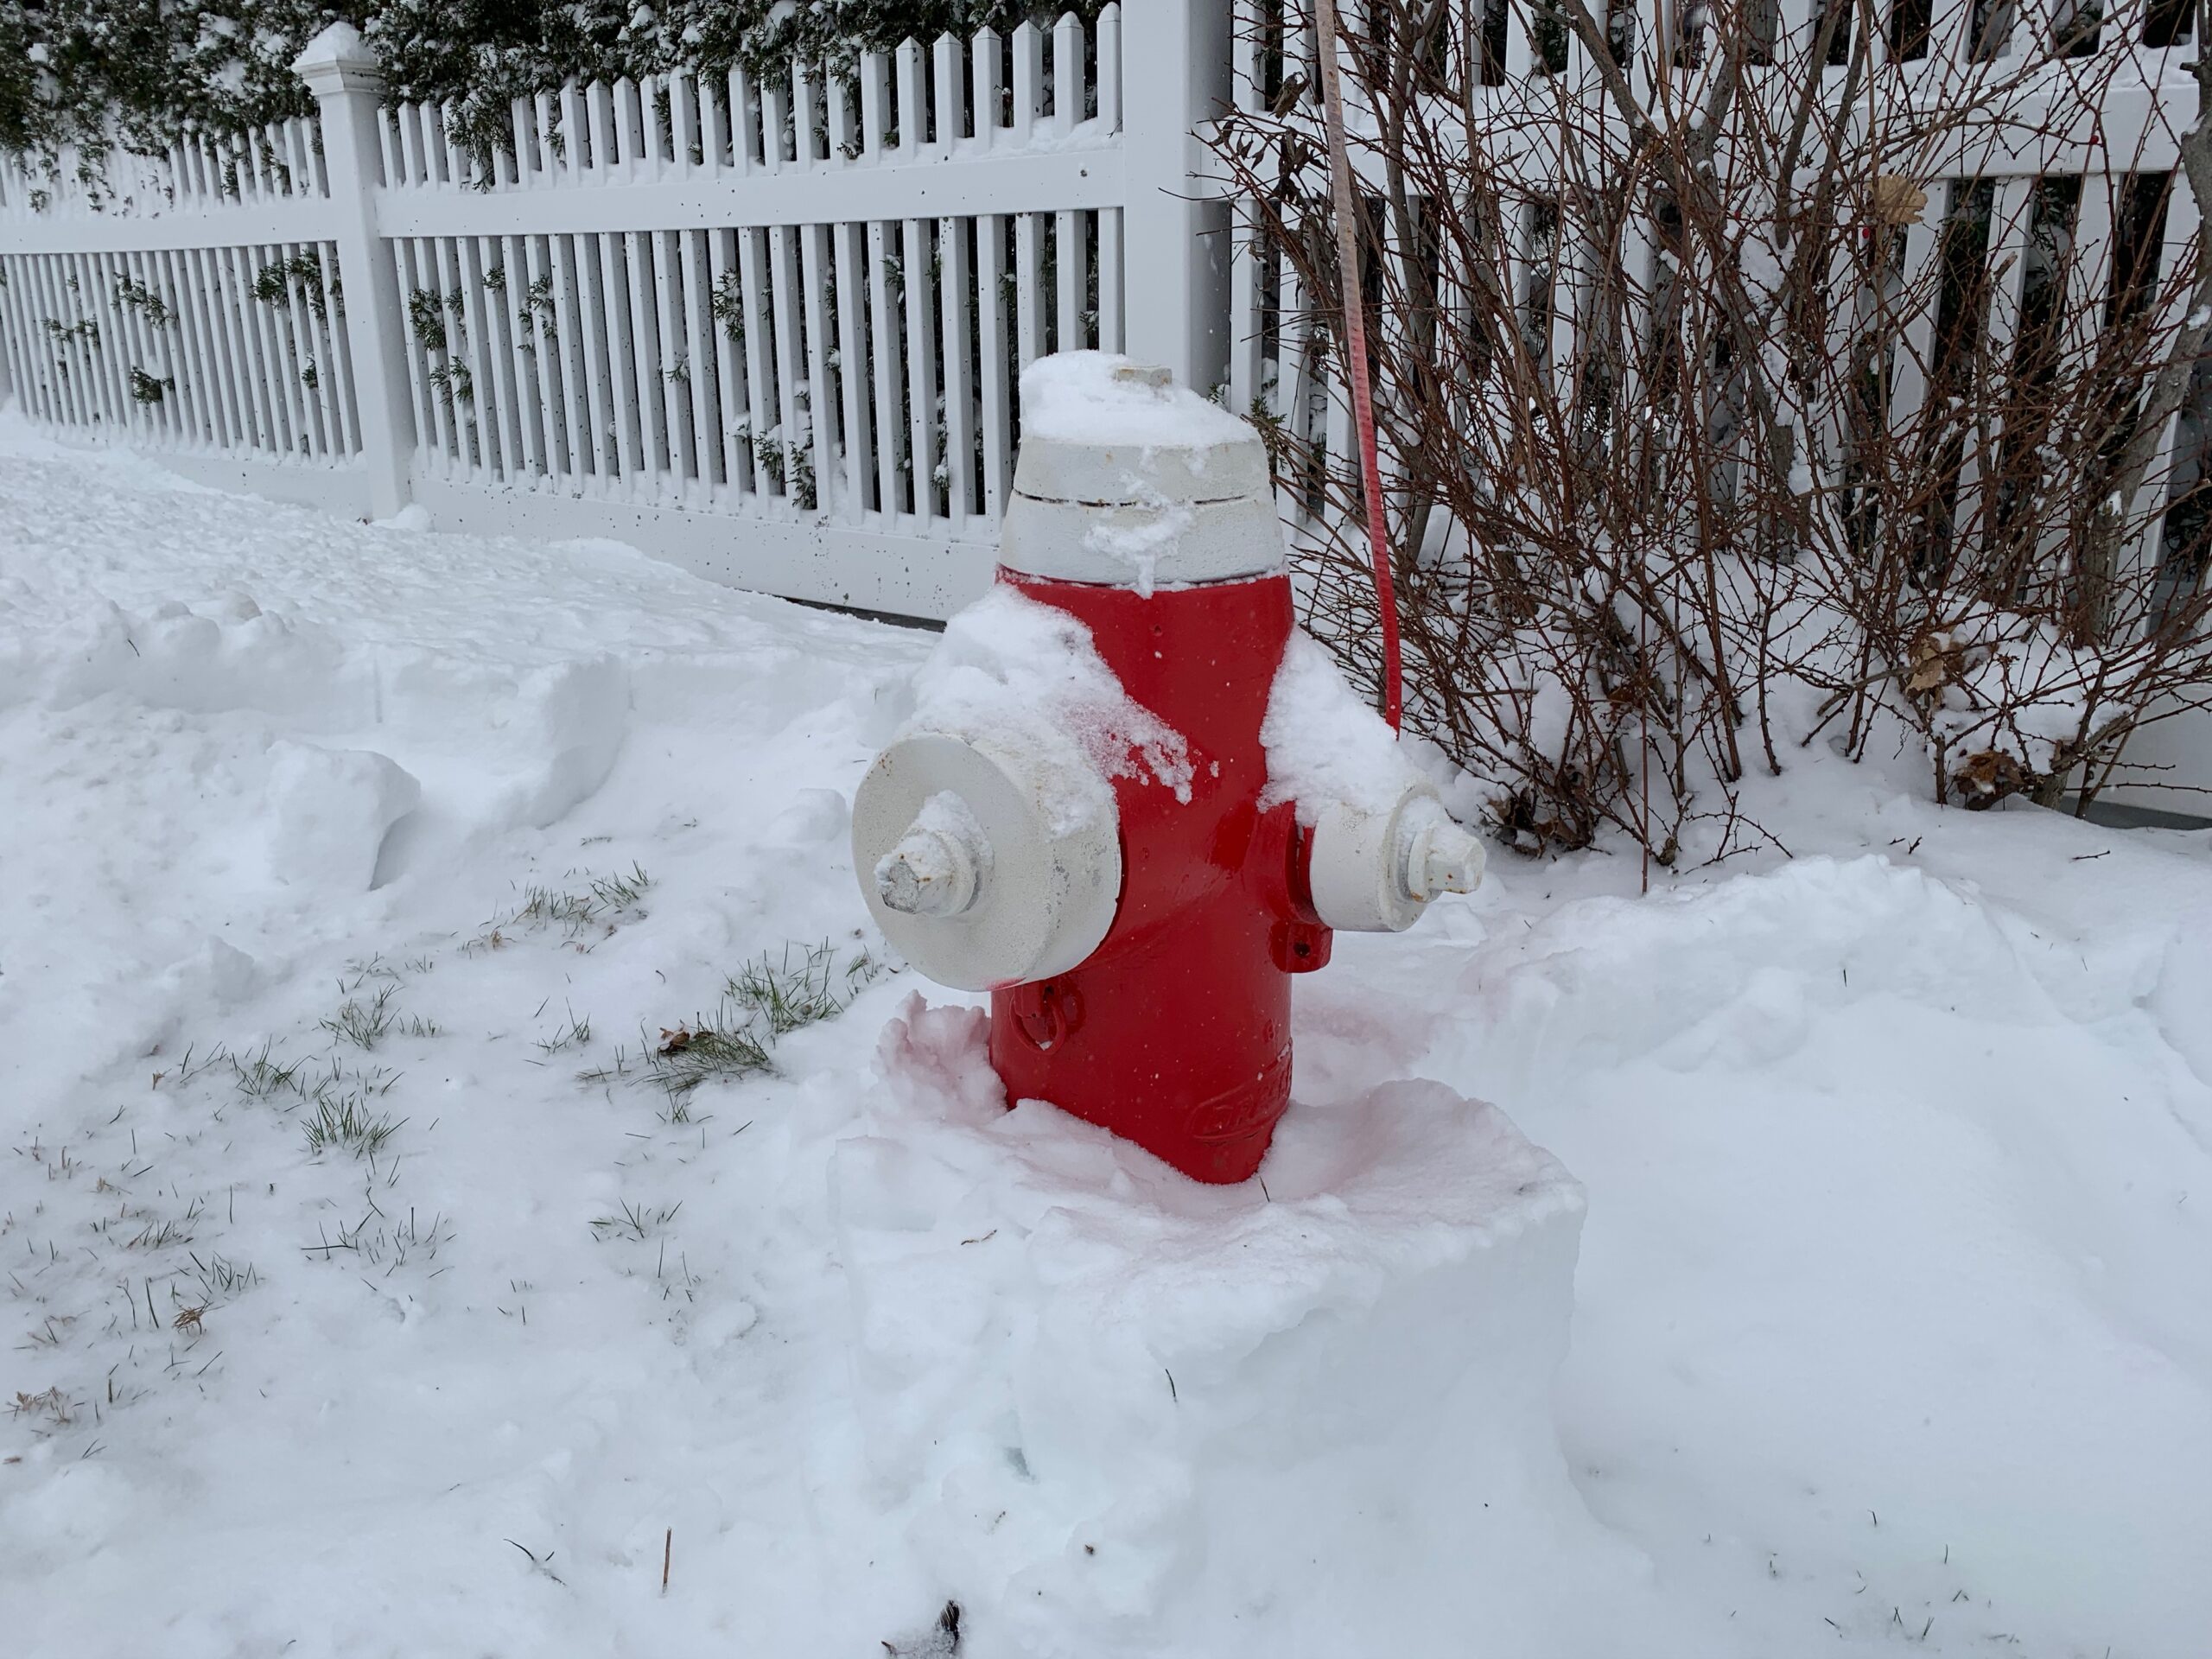 Town requests residents help ensure access to fire hydrants